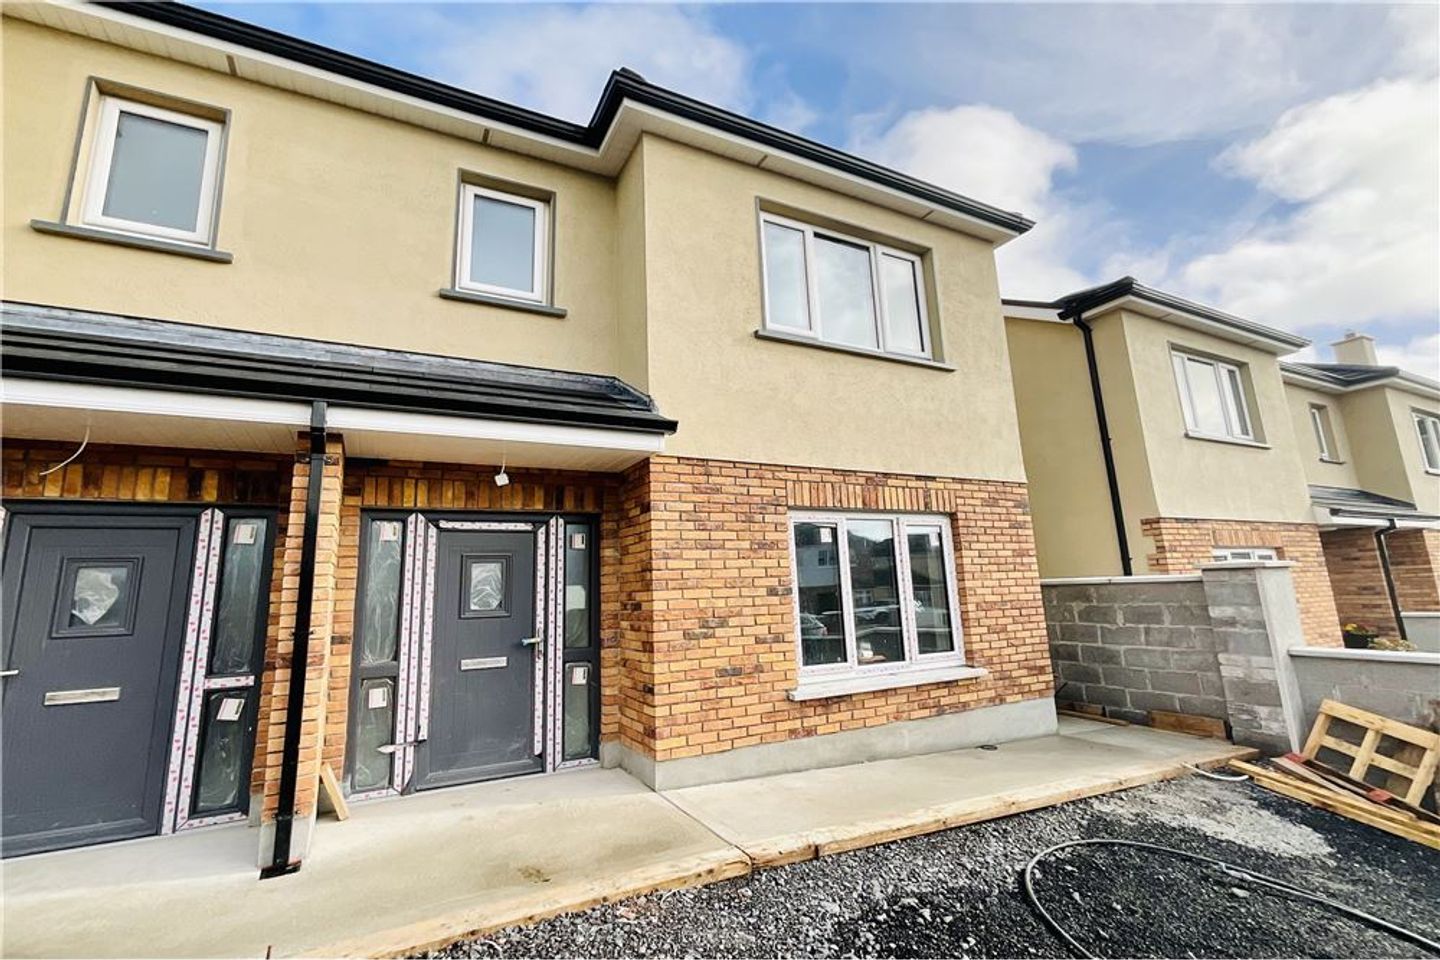 35A Castle Manor, Roscommon Town, Co. Roscommon